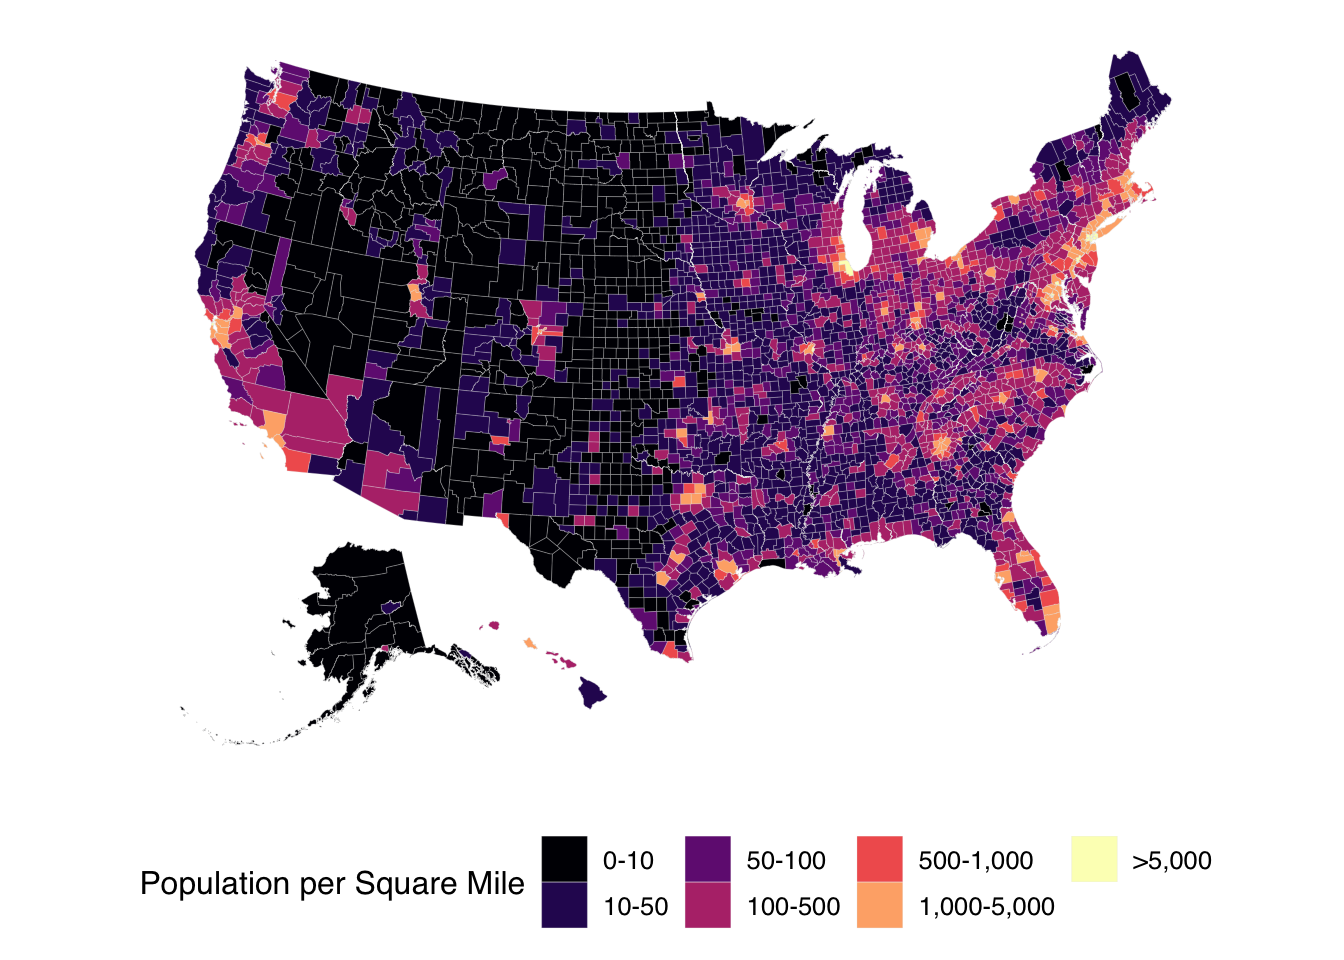 Population Density in the USA